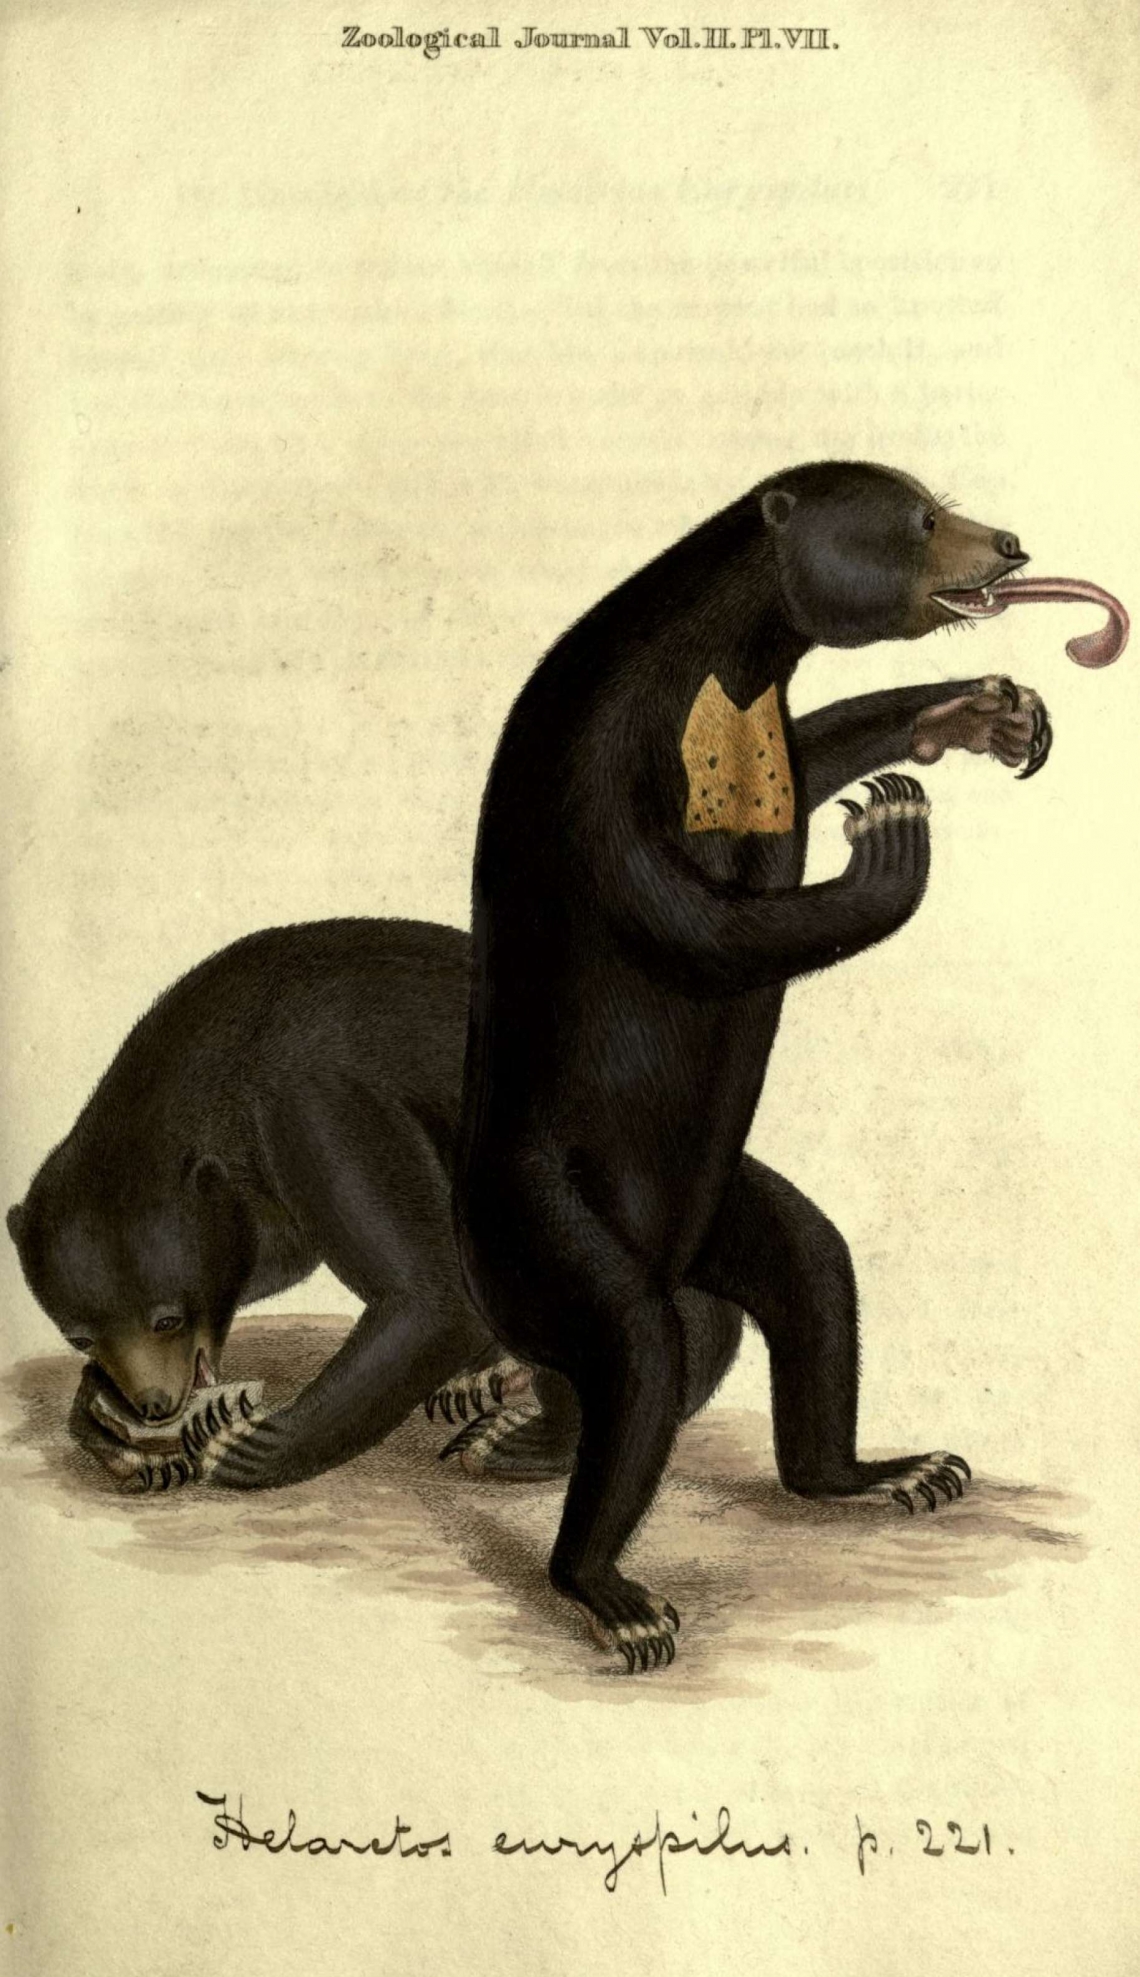 First published drawing of a Bornean sun bear, showing wide "quadrangular" chest marking. (From Horsfield 1825)